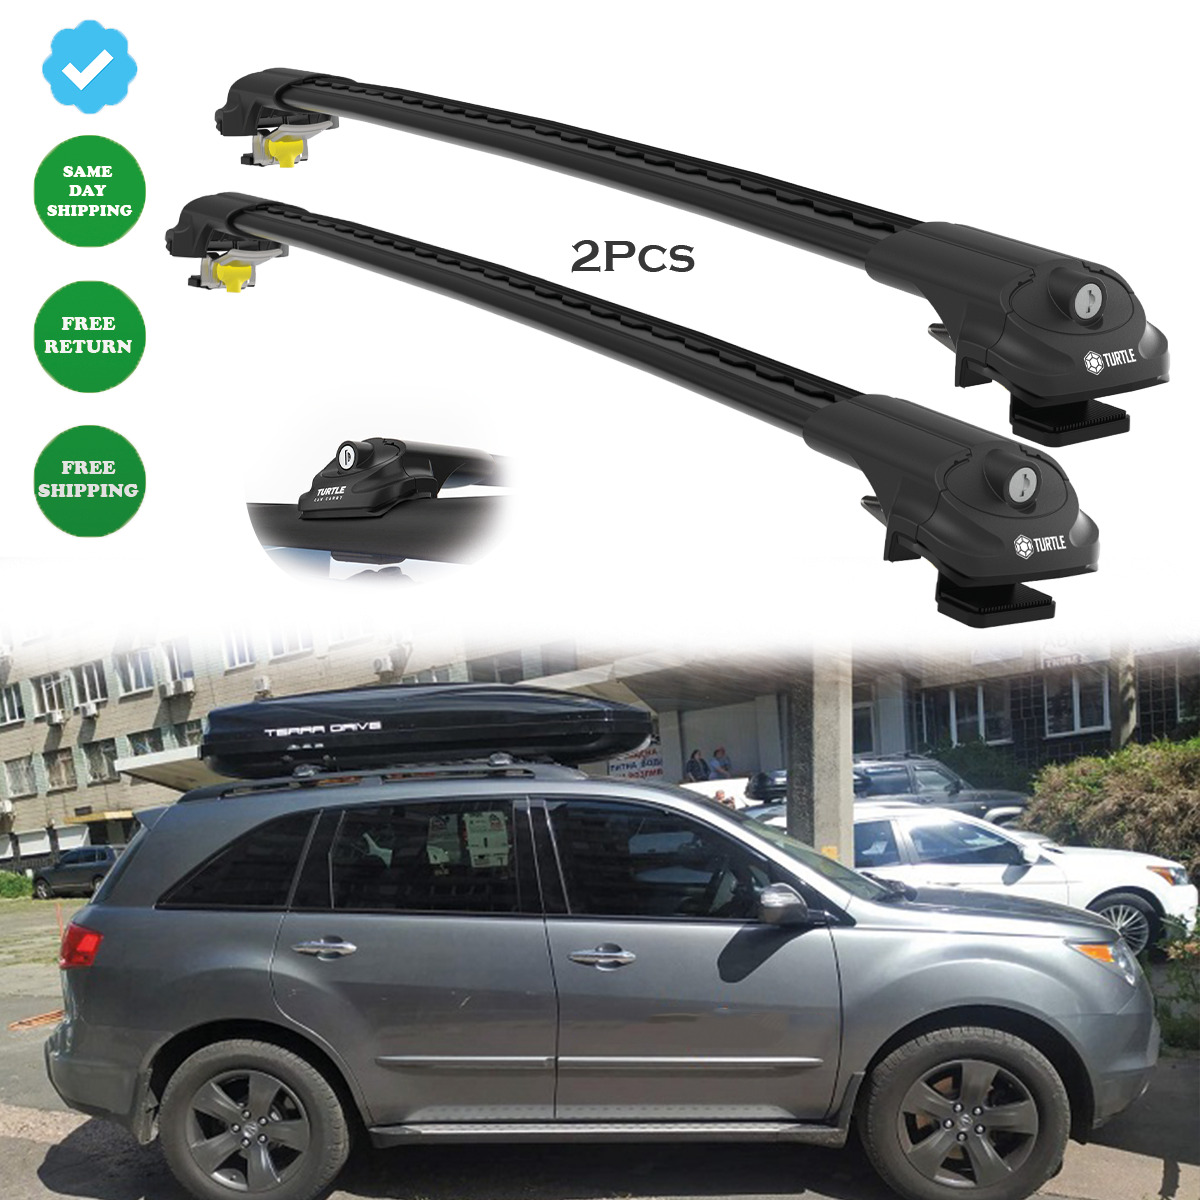 To fits Acura MDX 2007-2013 Roof Cross Rack Bars For Luggage Carrier 2 pcs A-1